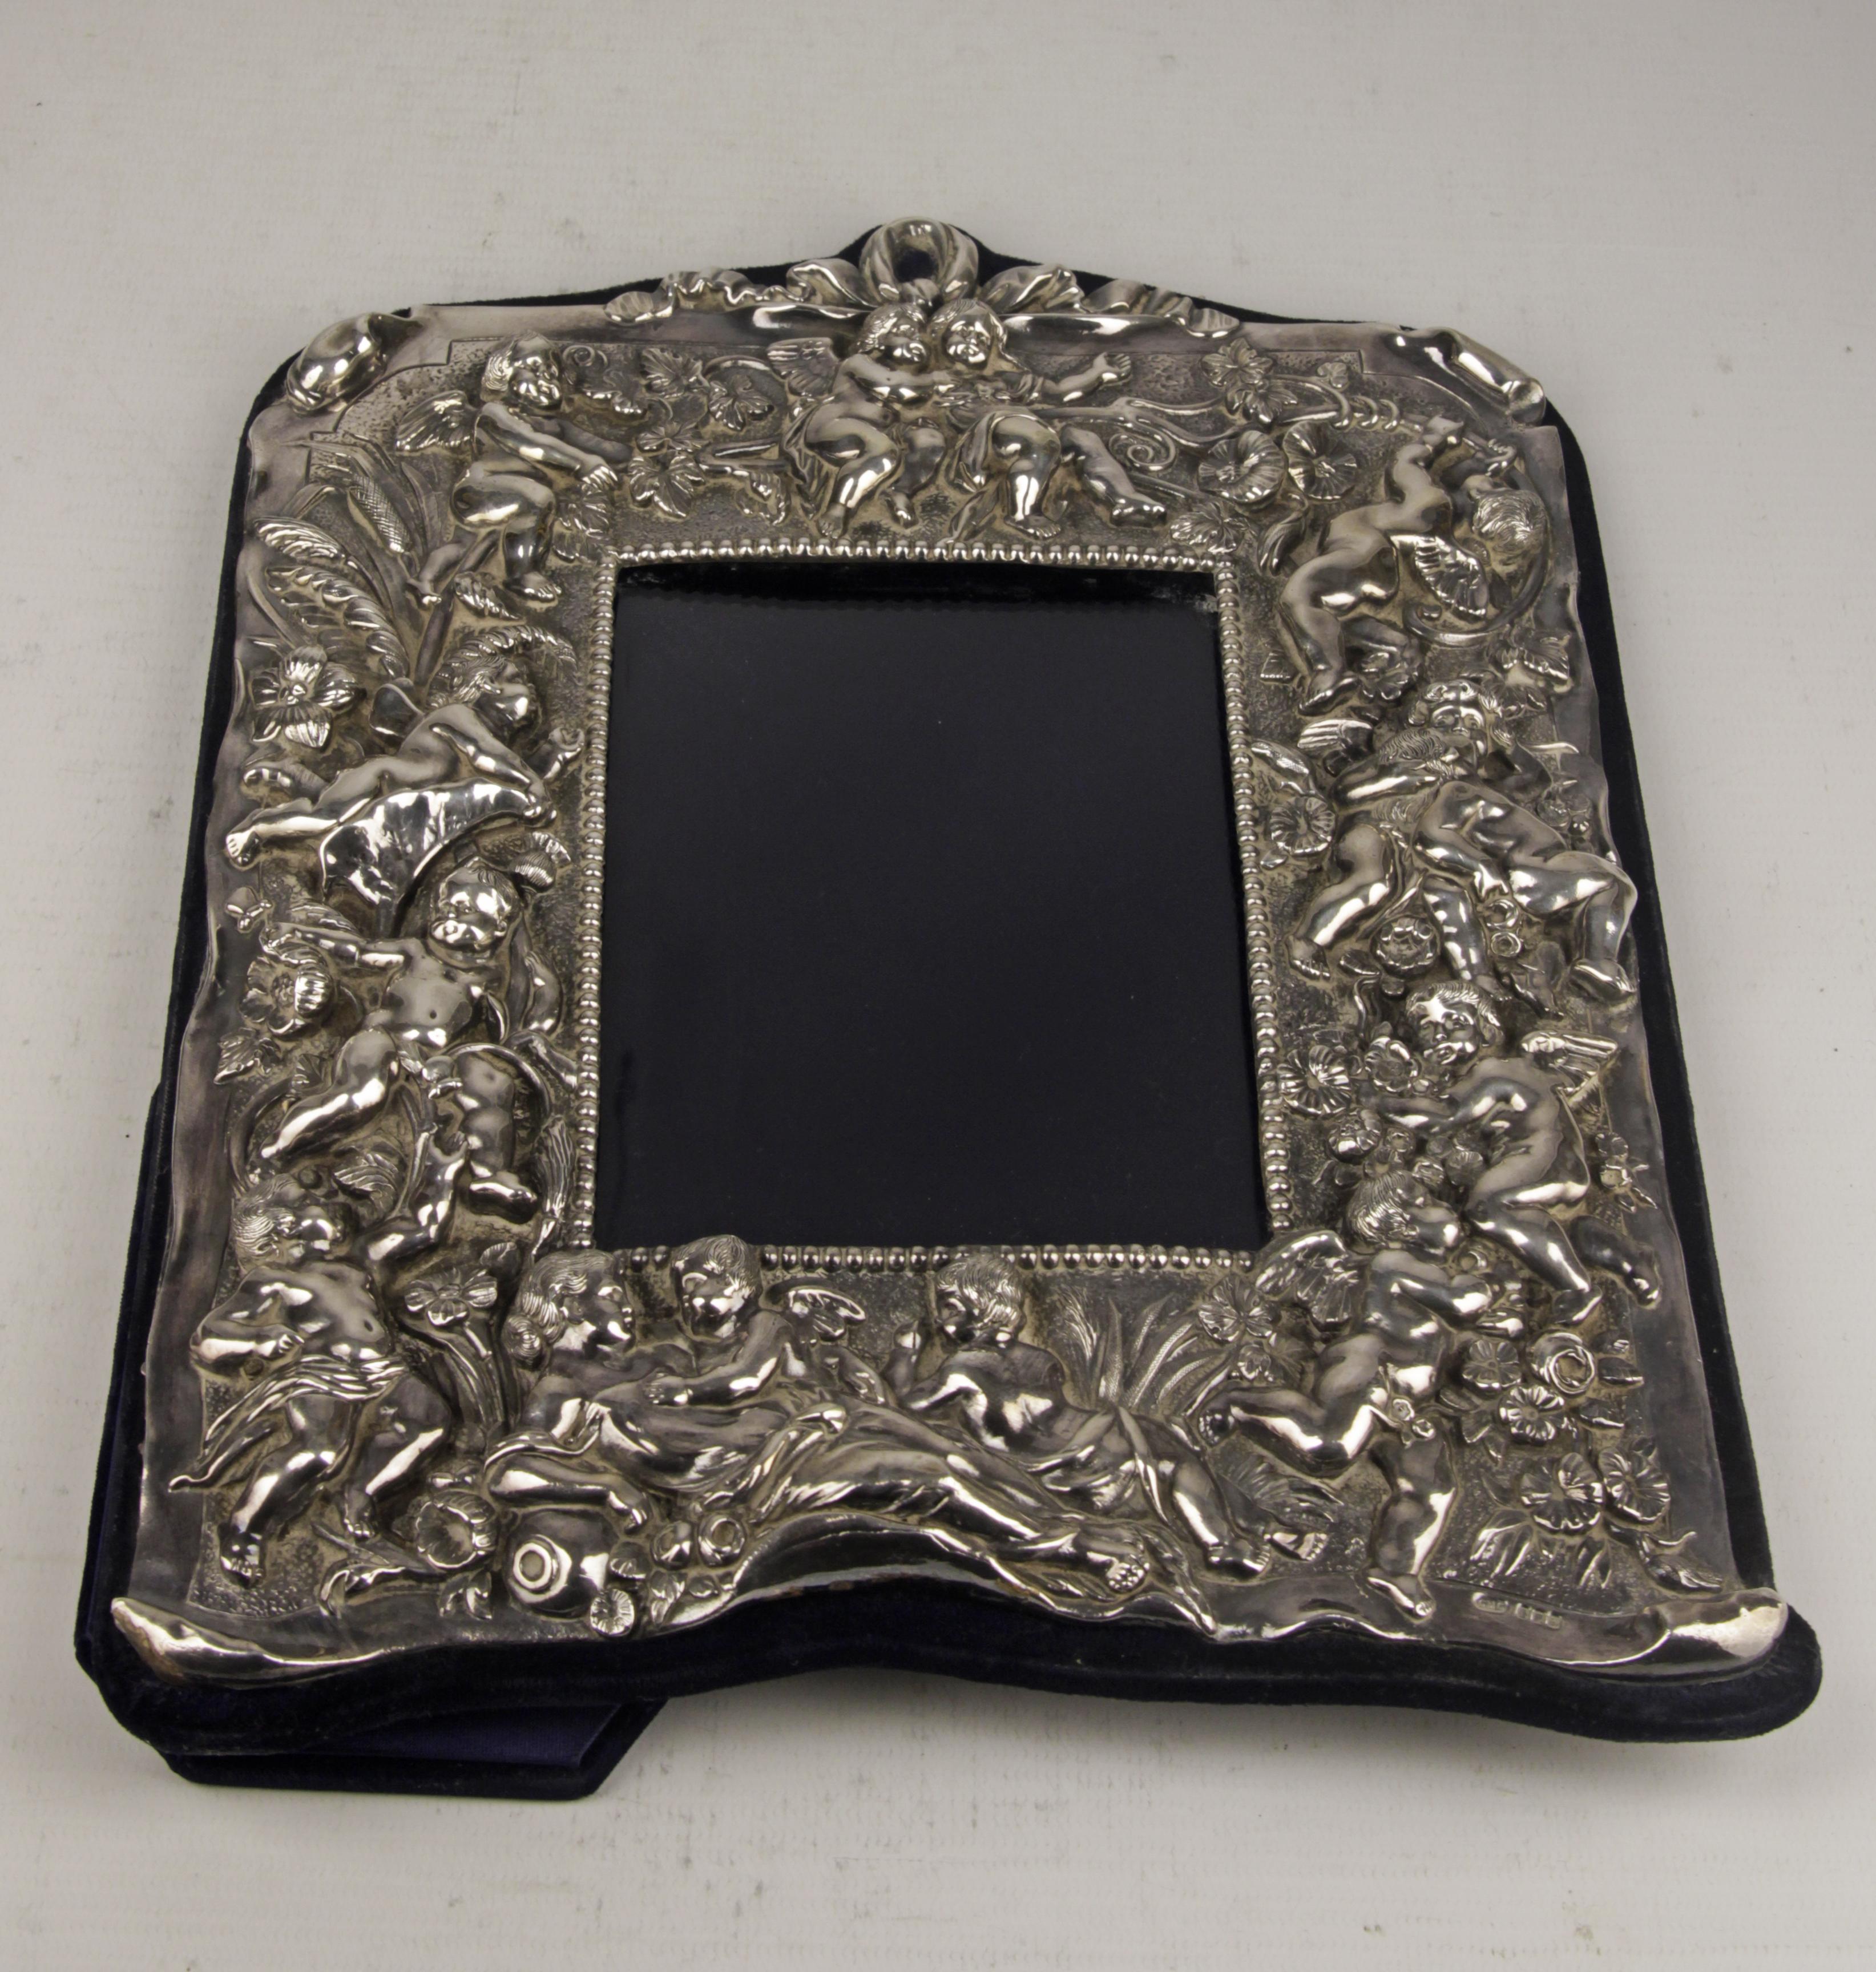 Silver Plate Late 20th Century English Sterling Silver Frame with Cherubs and Plant Motifs